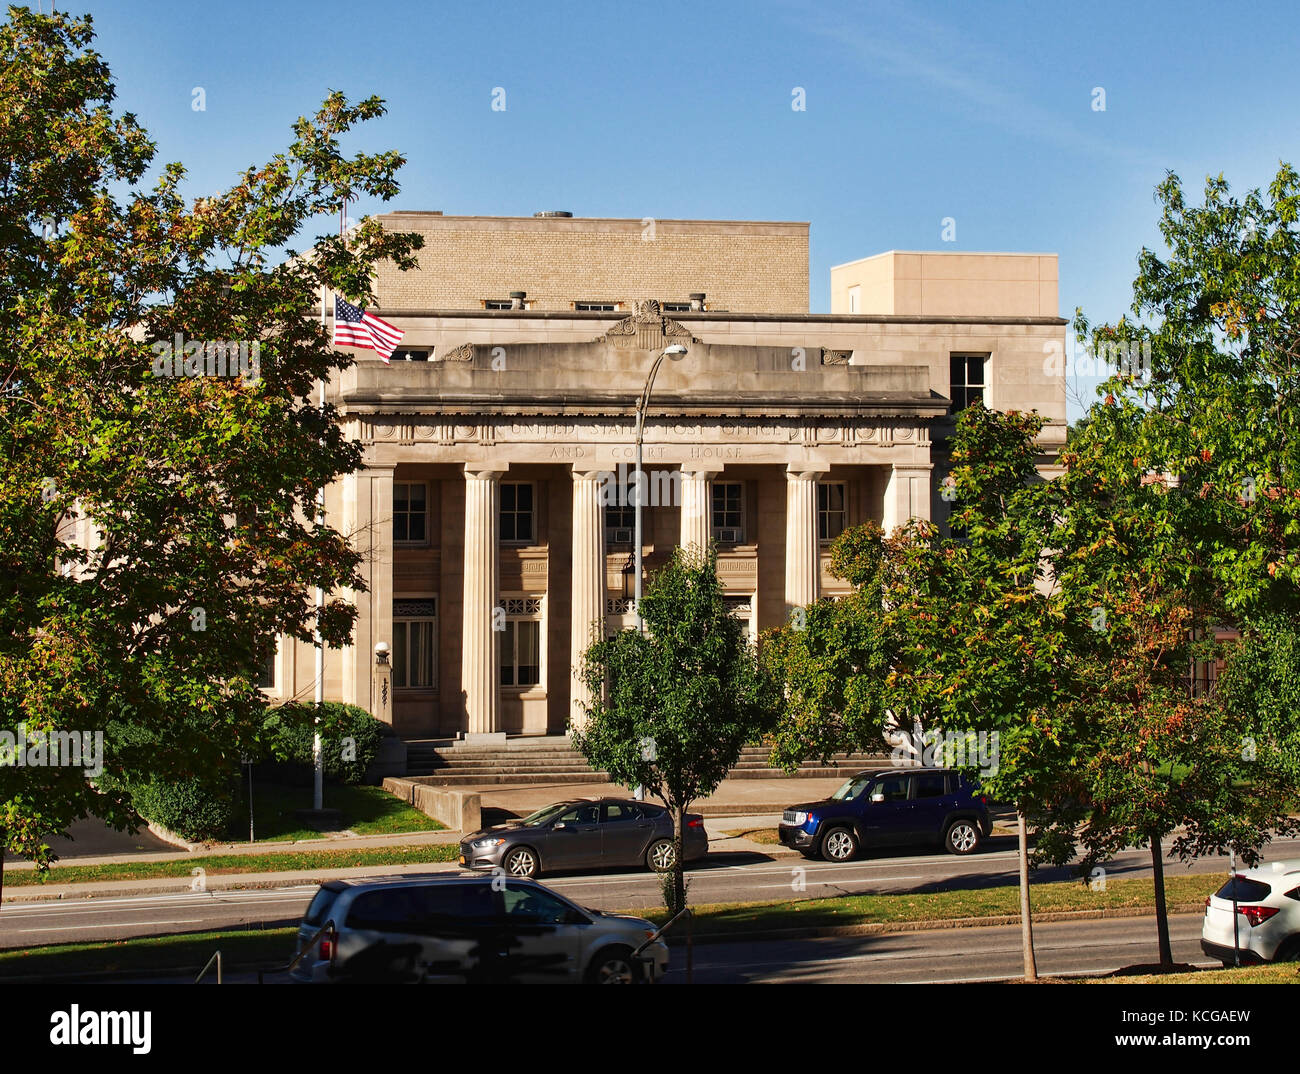 Canandaigua, New York, USA. October 3, 2017. Street view of the Canandaigua , New York Post Office and Courthouse Stock Photo